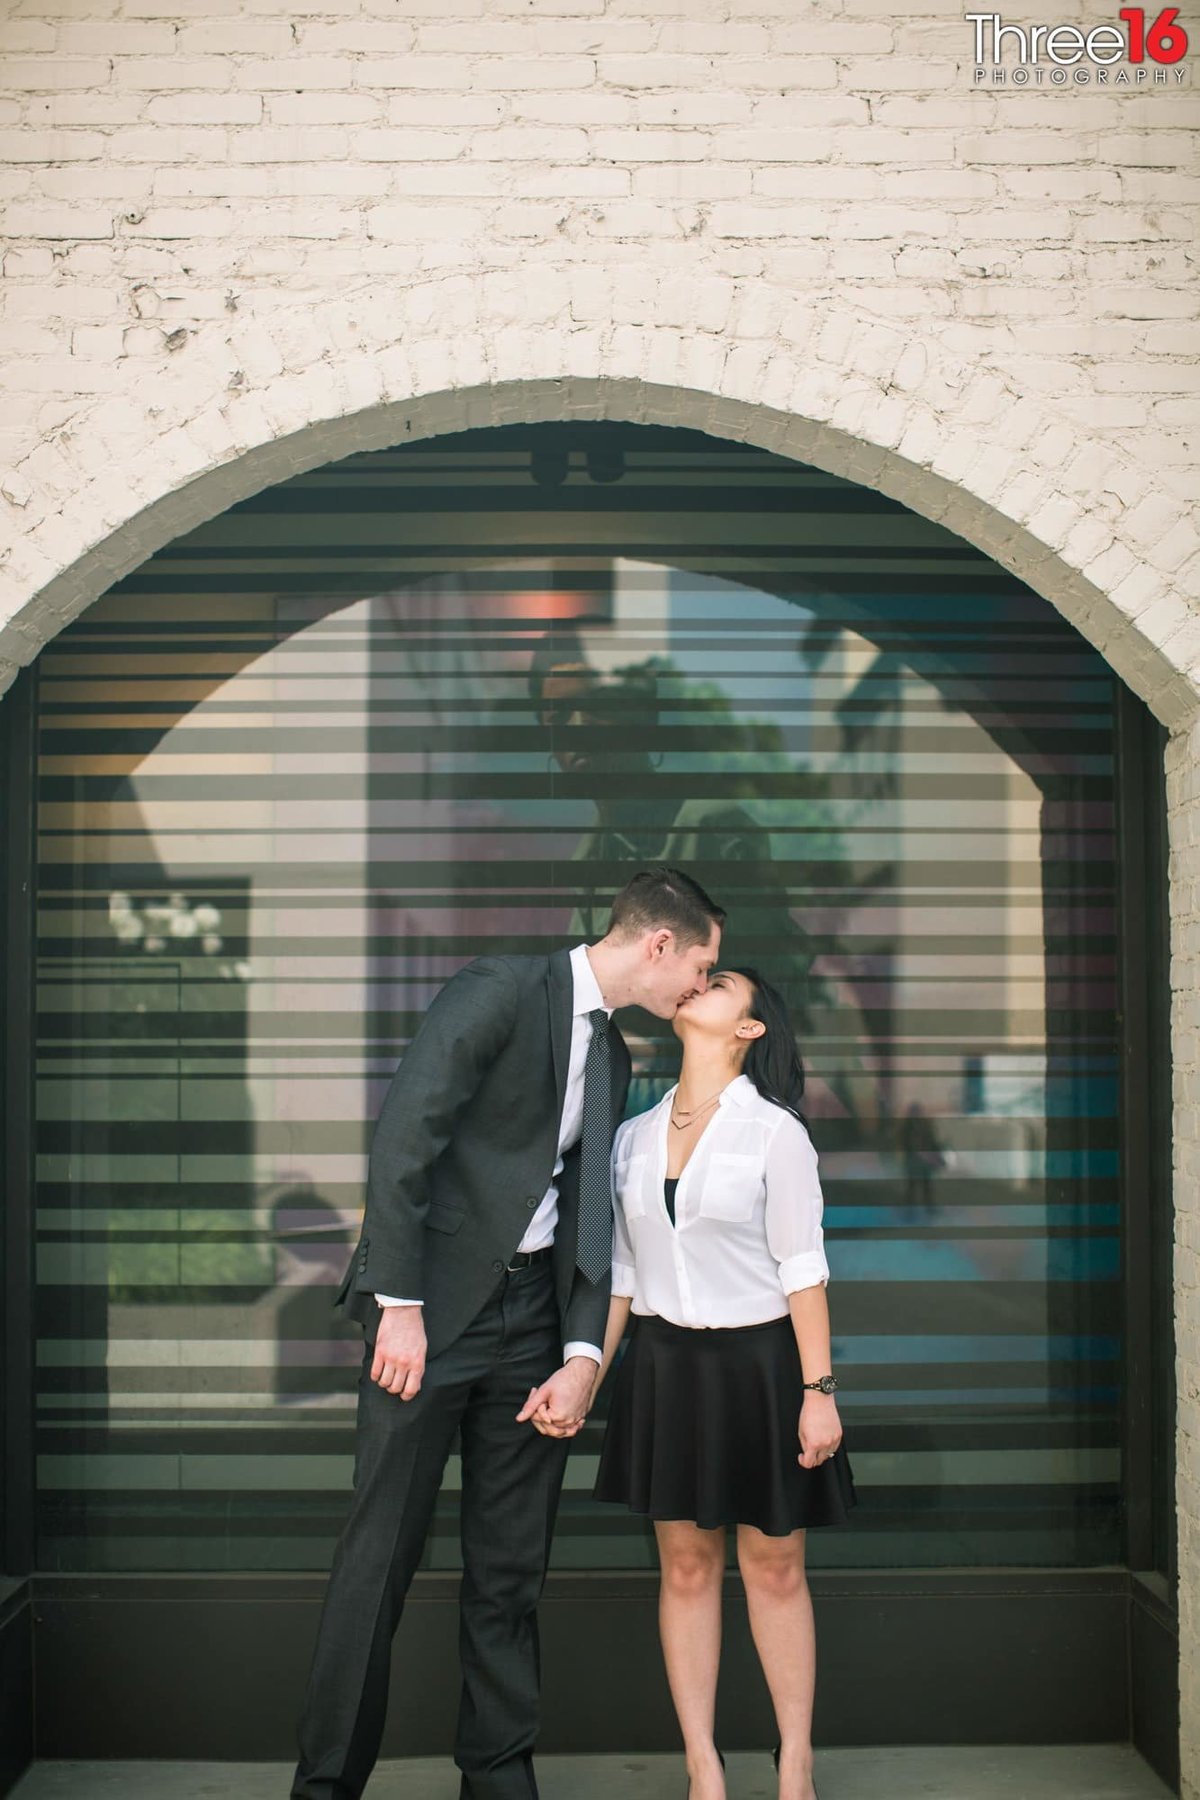 Engaged couple share a romantic kiss during photo session